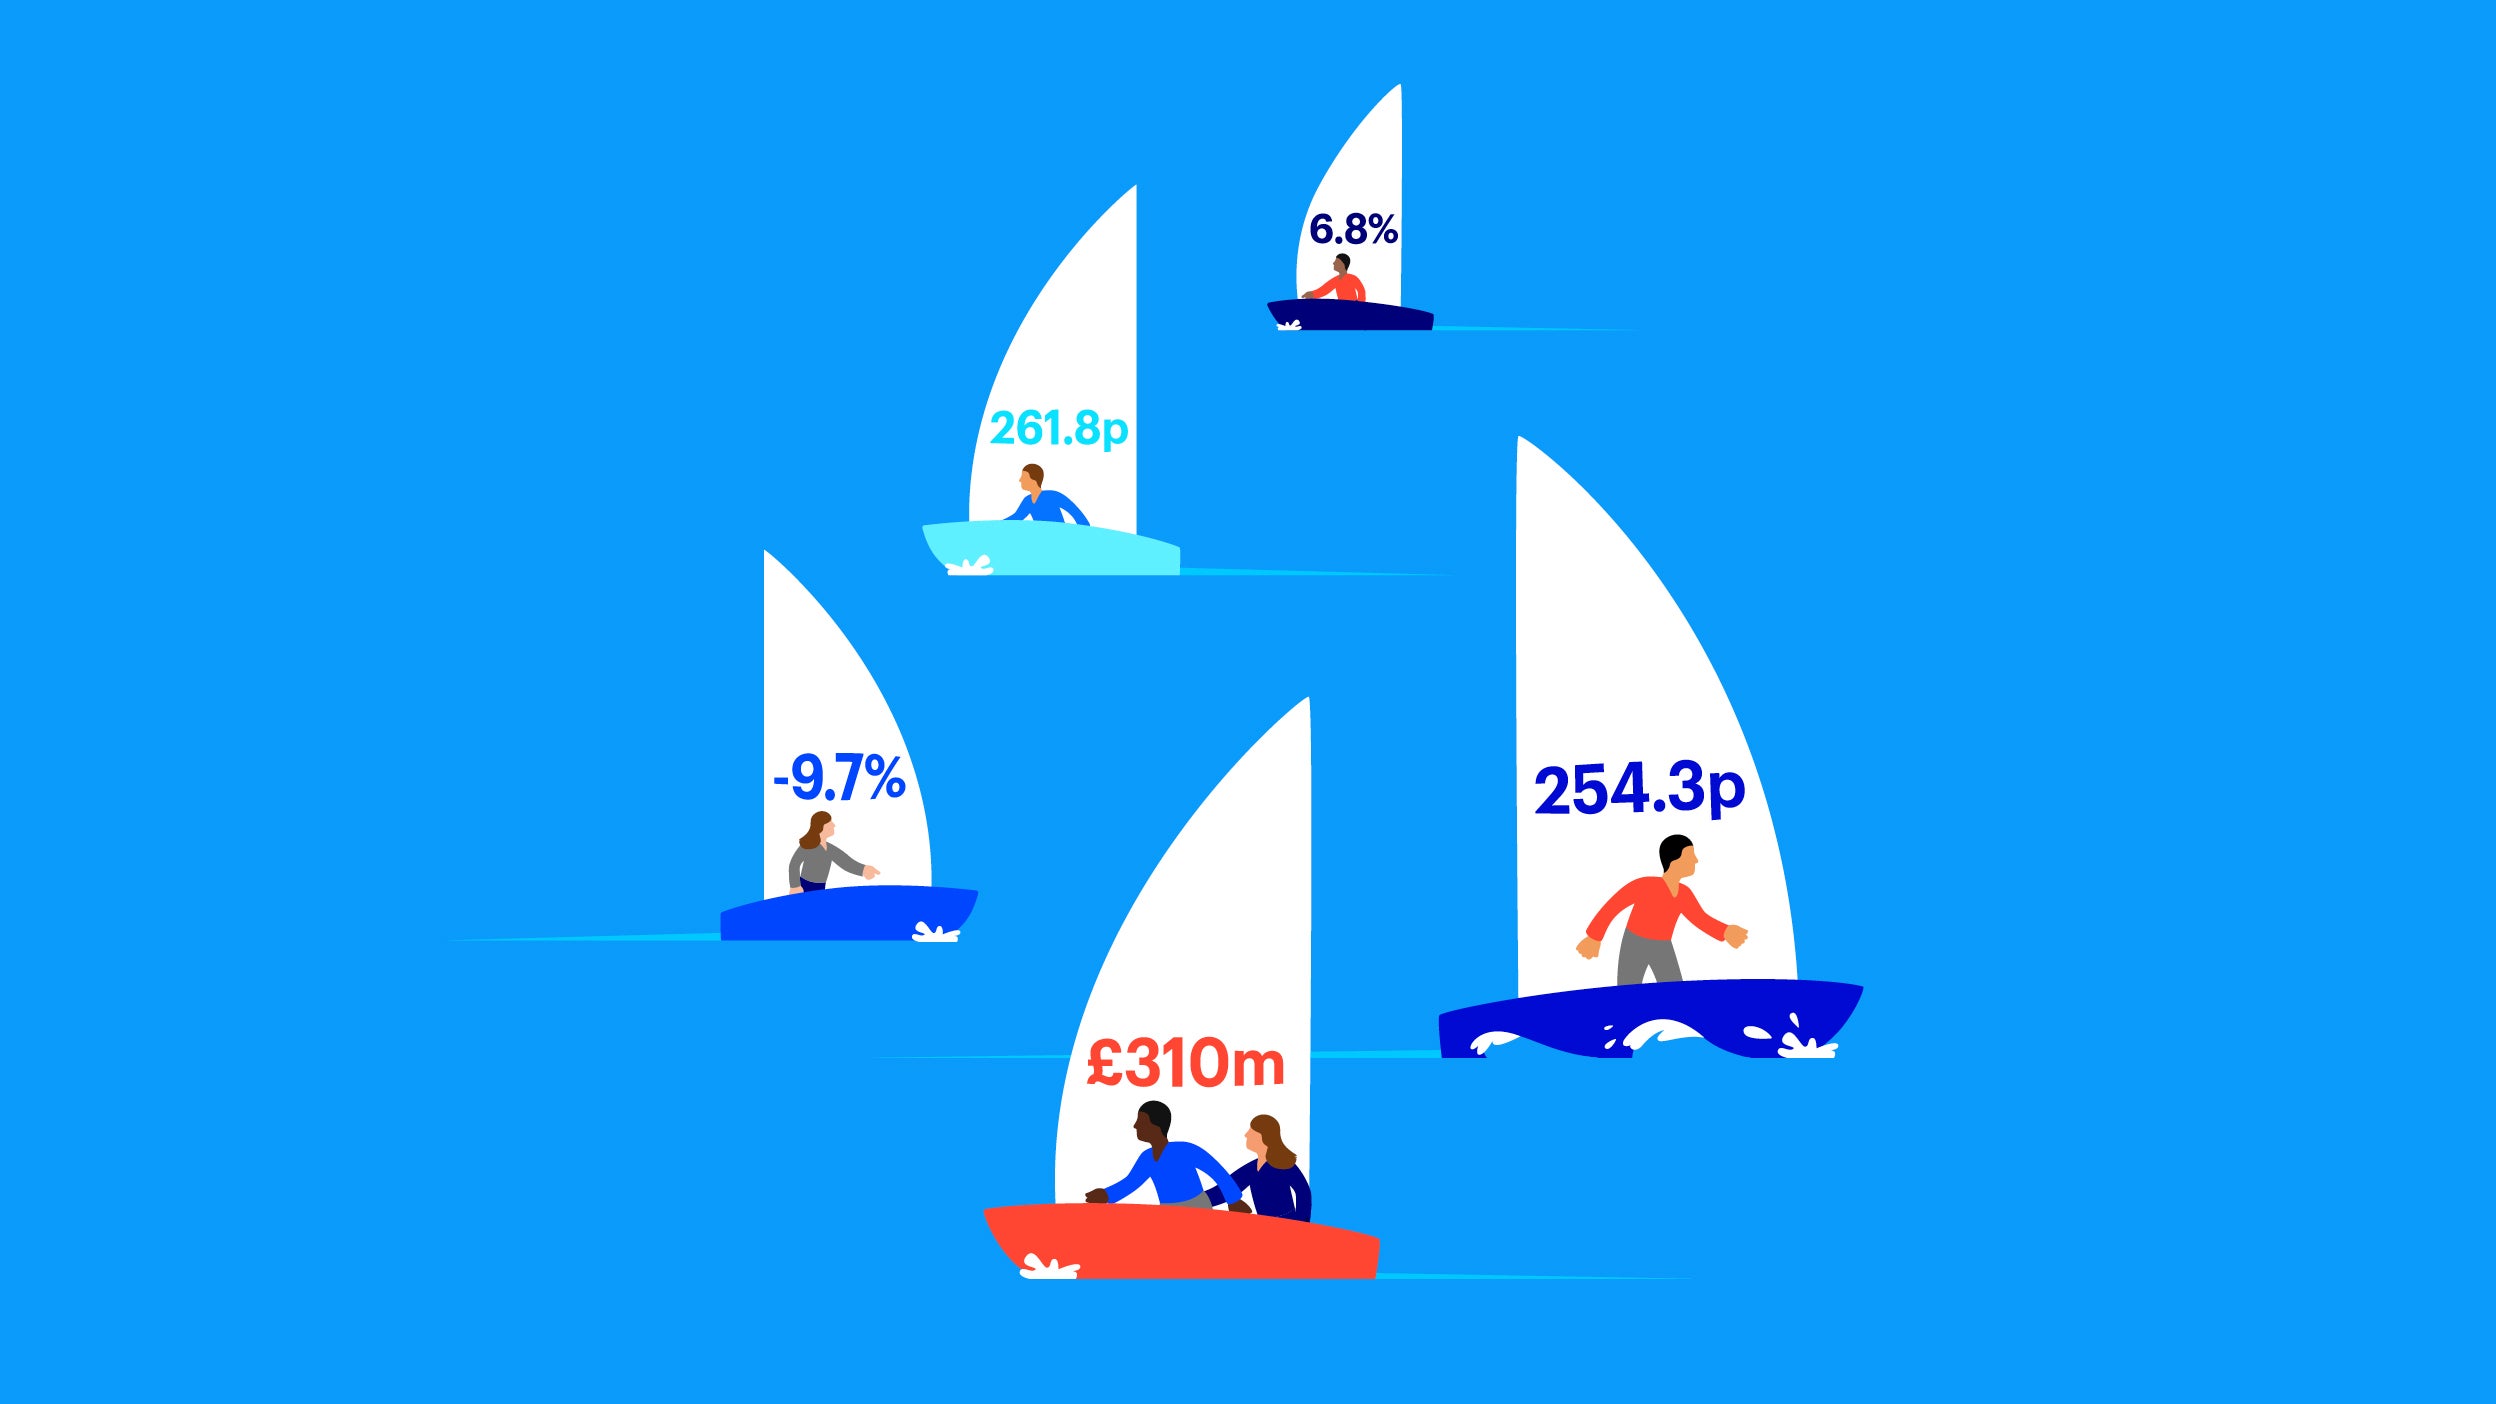 Investment trusts: what do all the numbers mean?